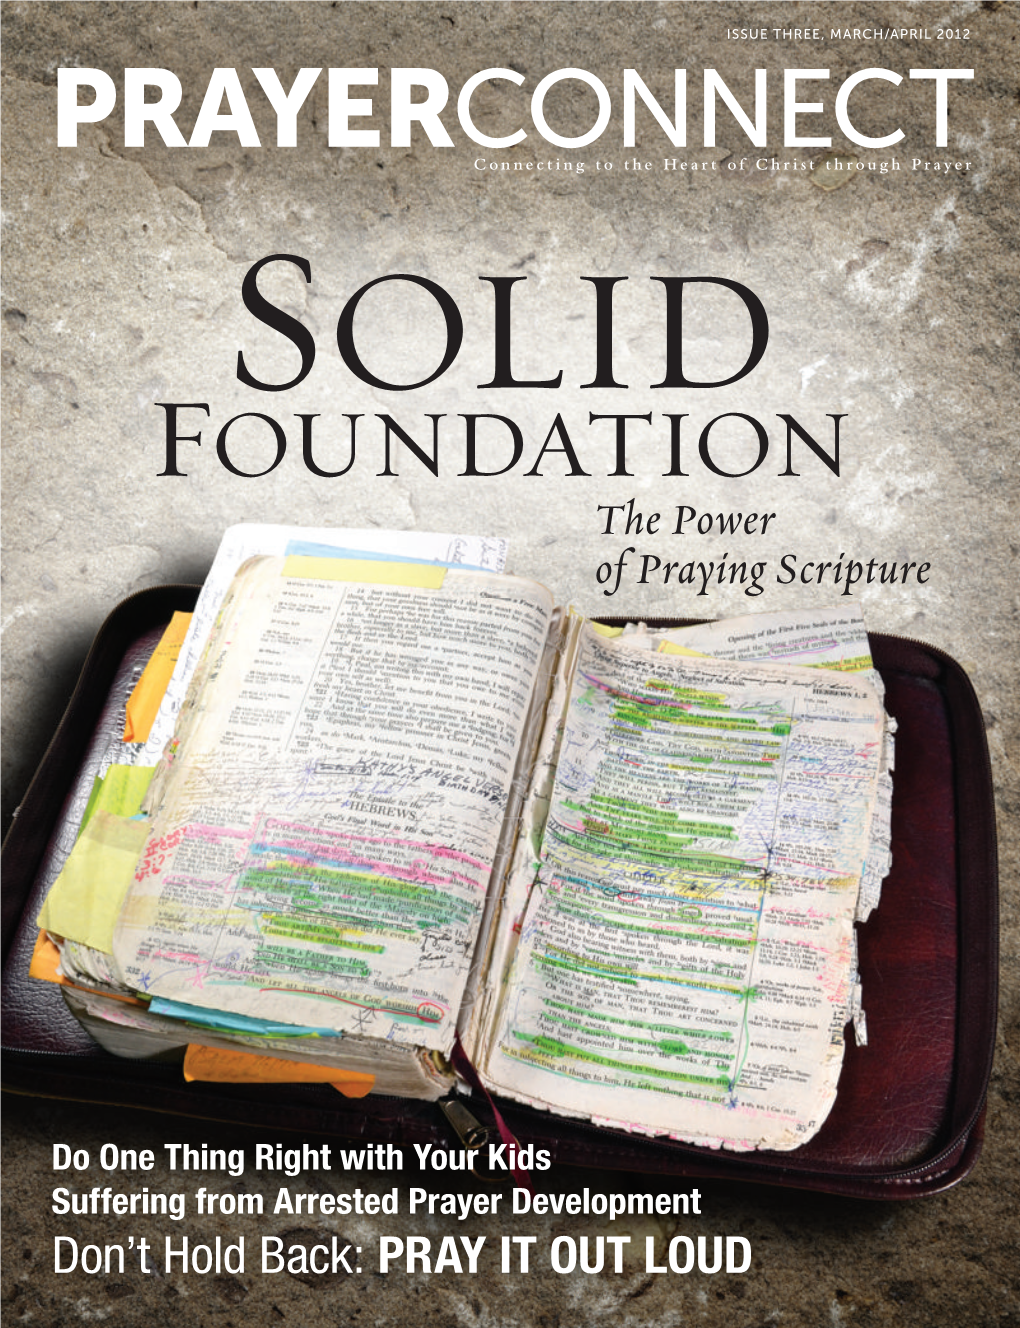 Issue 3 – Solid Foundation: the Power of Praying Scripture